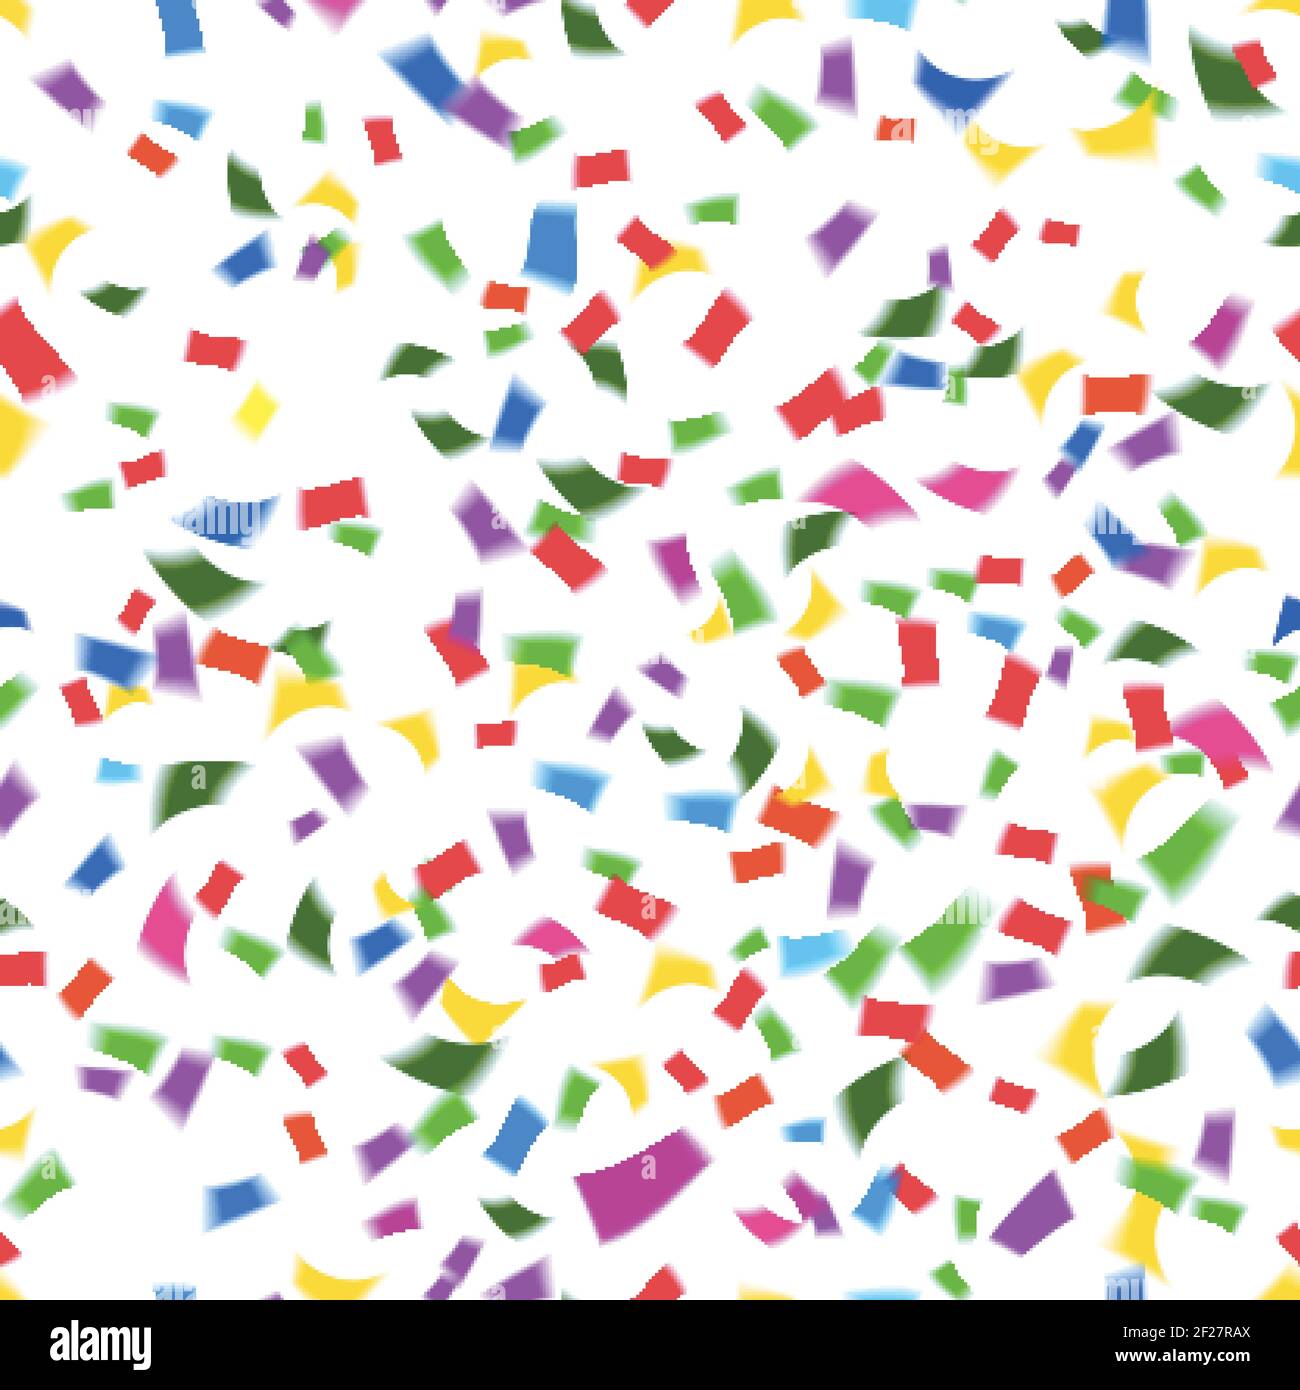 Confetti Paper Falling Scatter Bright Colorful Spectrum Rainbow Festival  Celebration Stock Vector by ©Hatcha 237681566